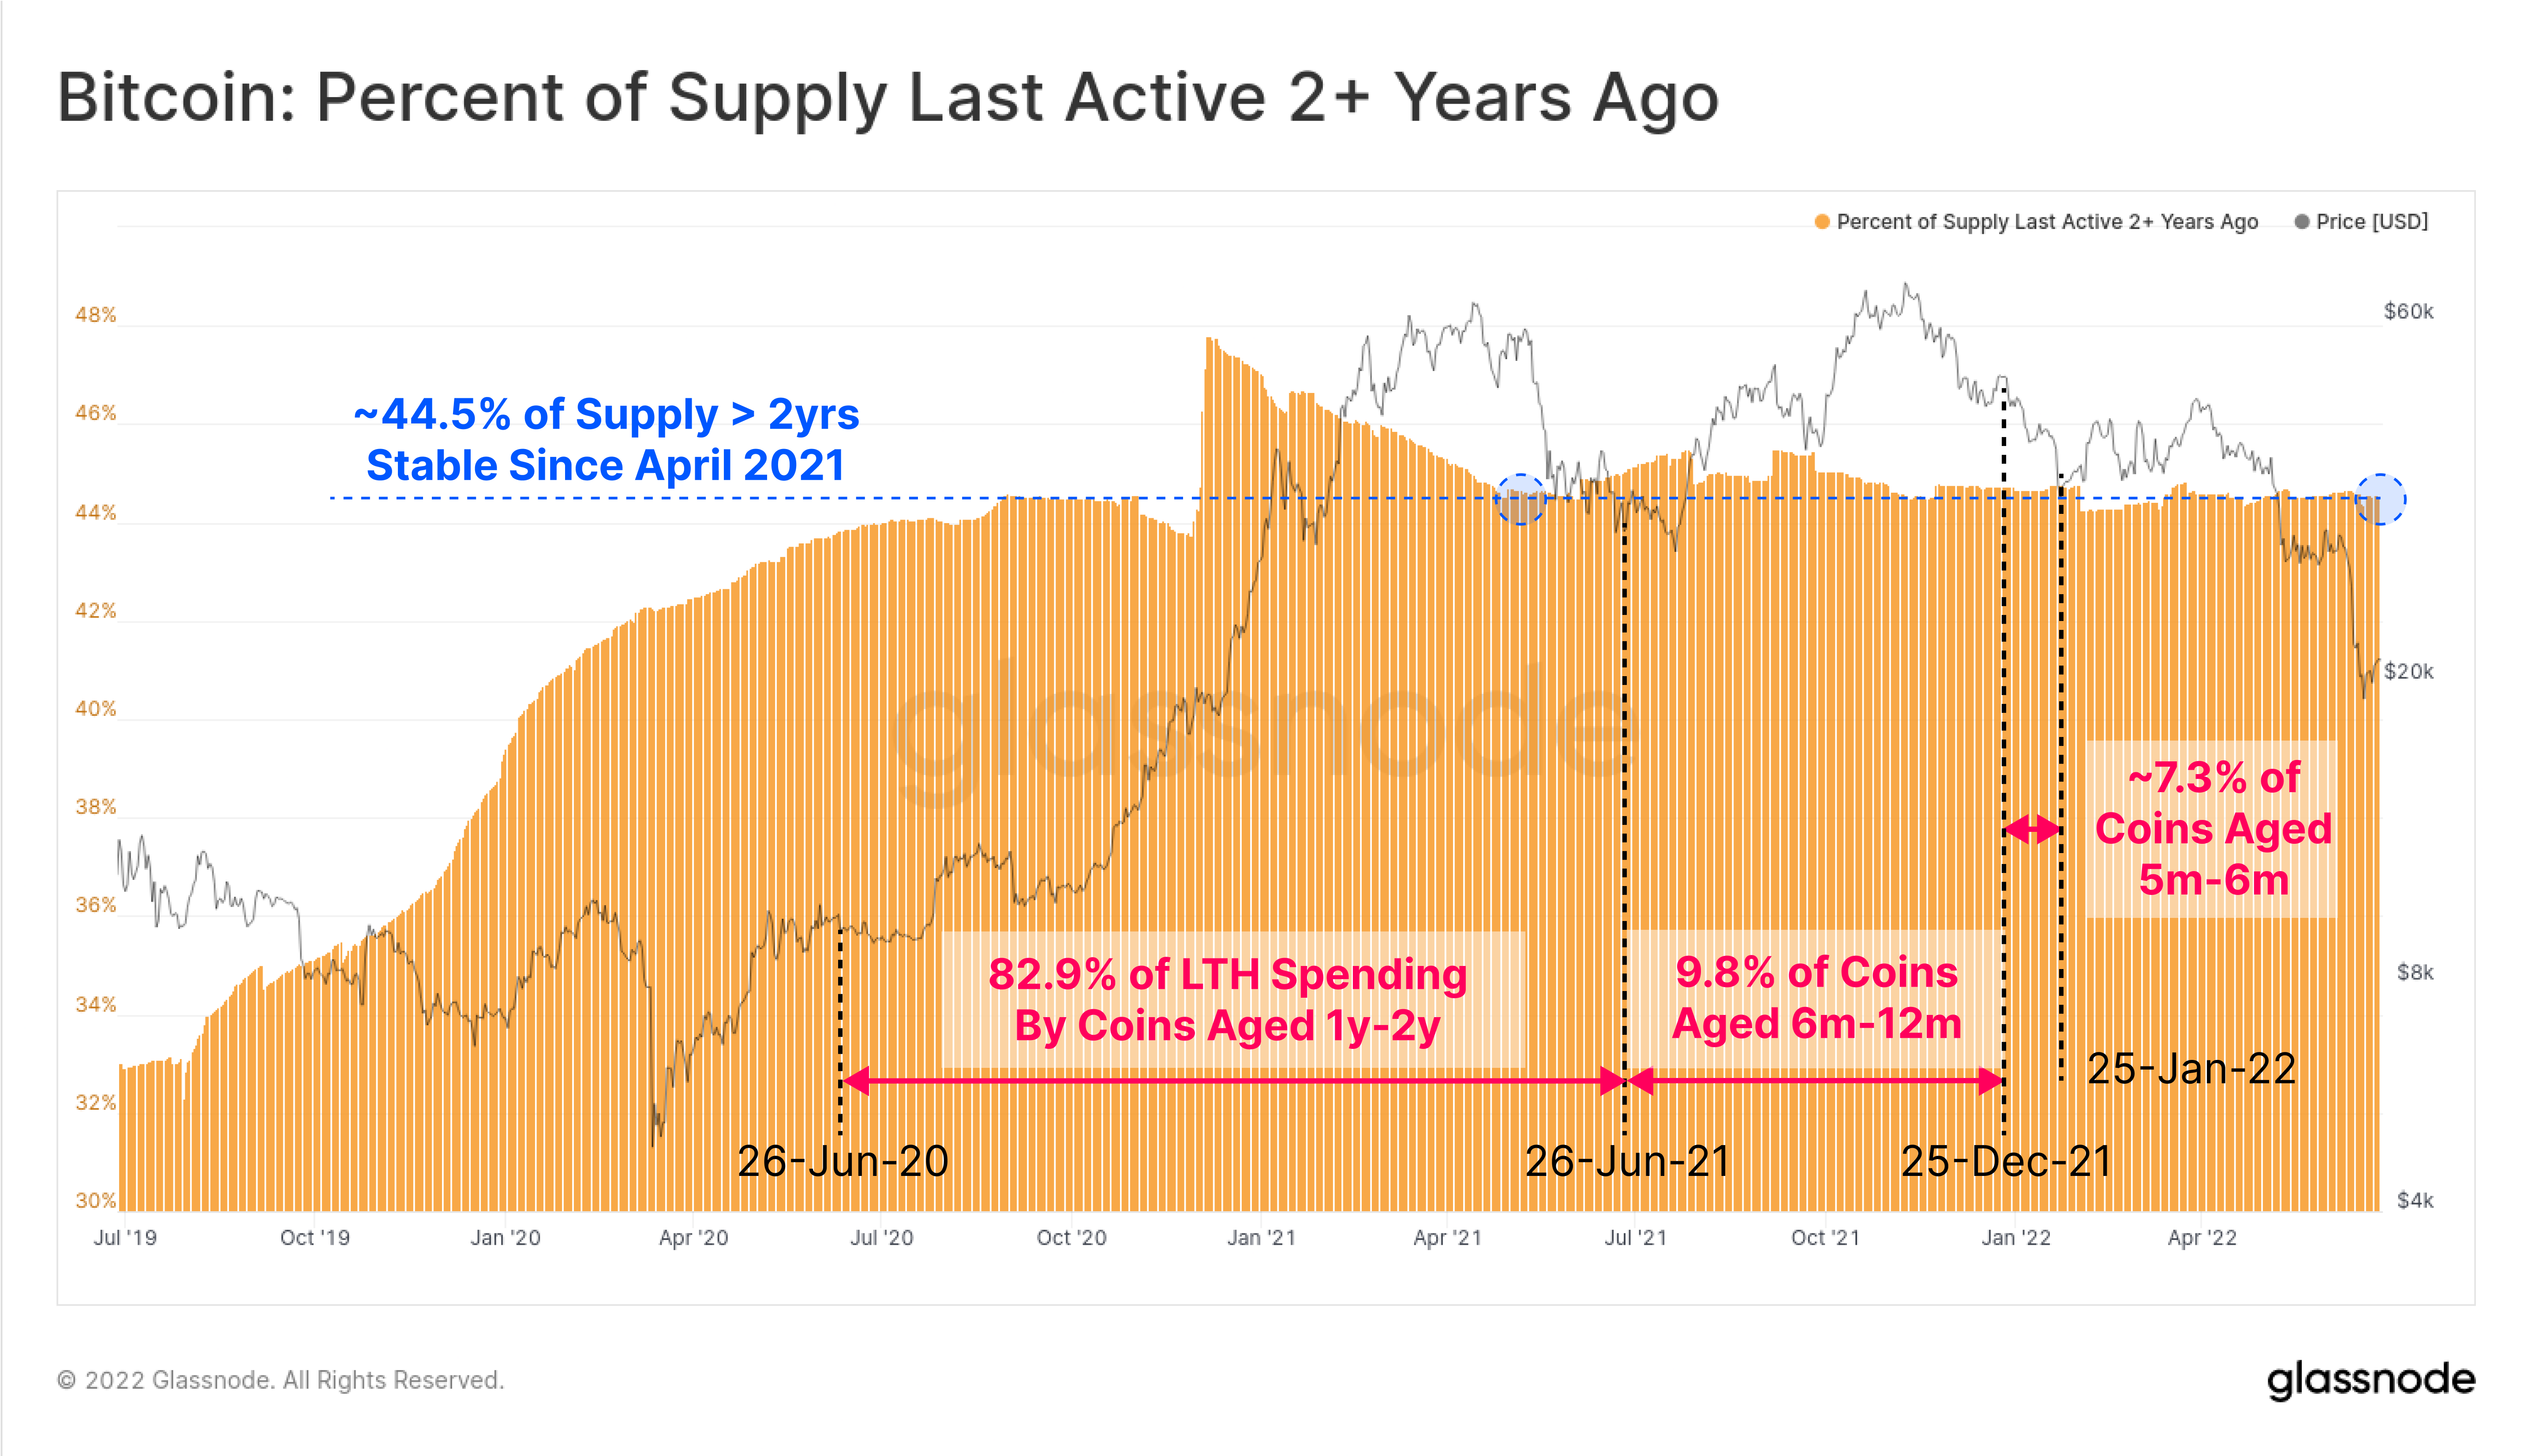 Bitcoin: Percent of Supply Last Active 2+ Year Ago